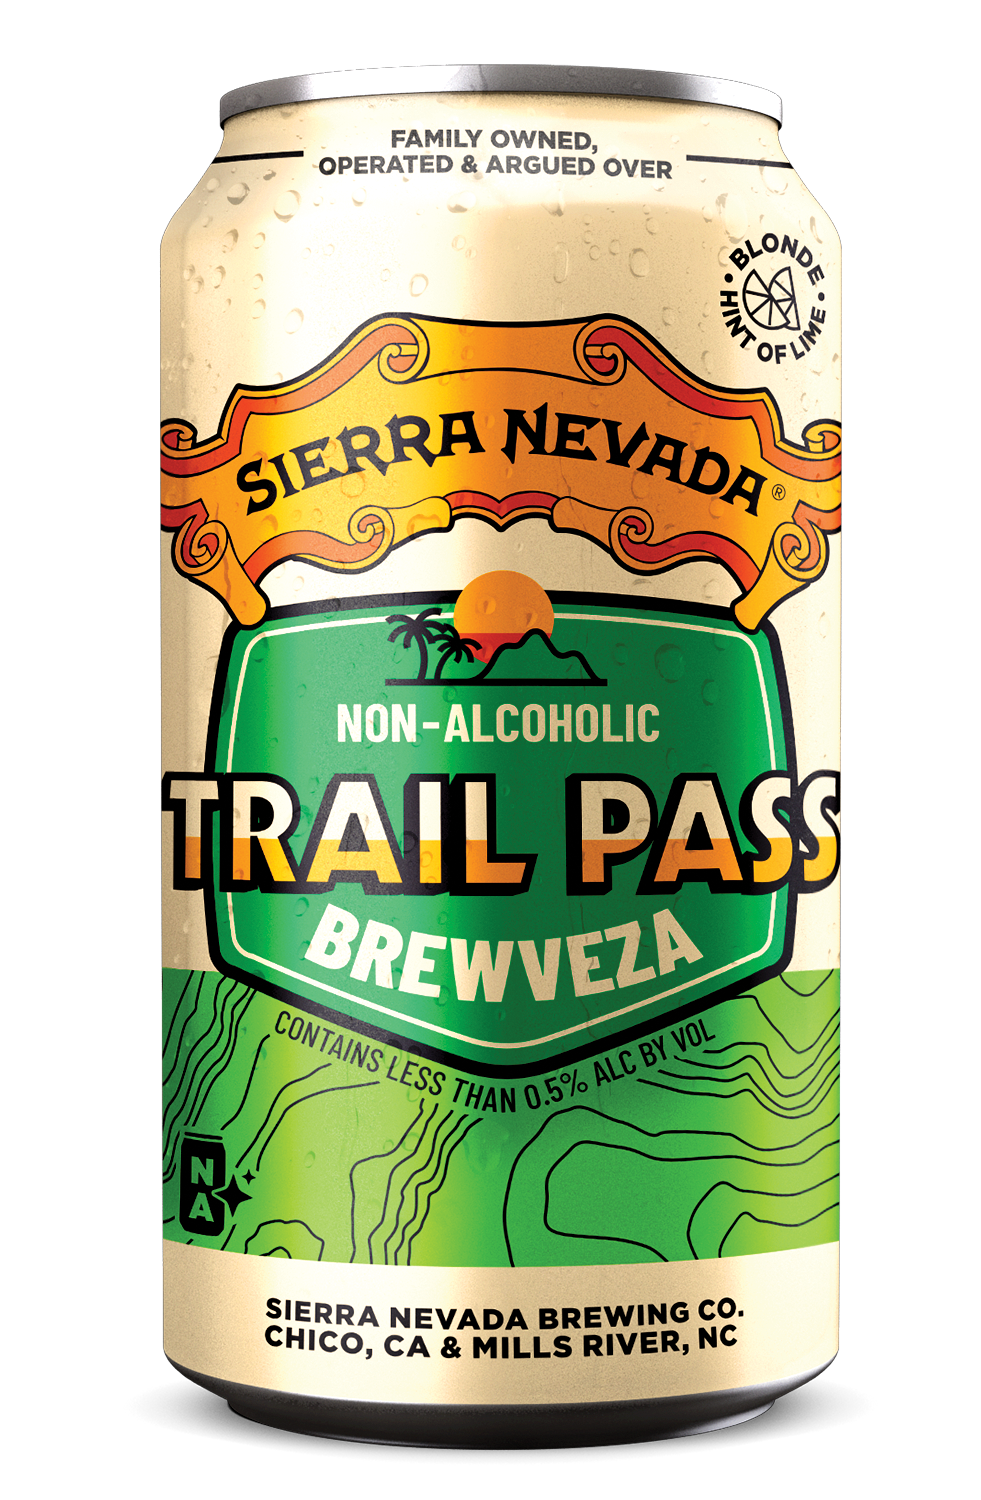 An individual can of Sierra Nevada non-alcoholic Trail Pass Brewveza